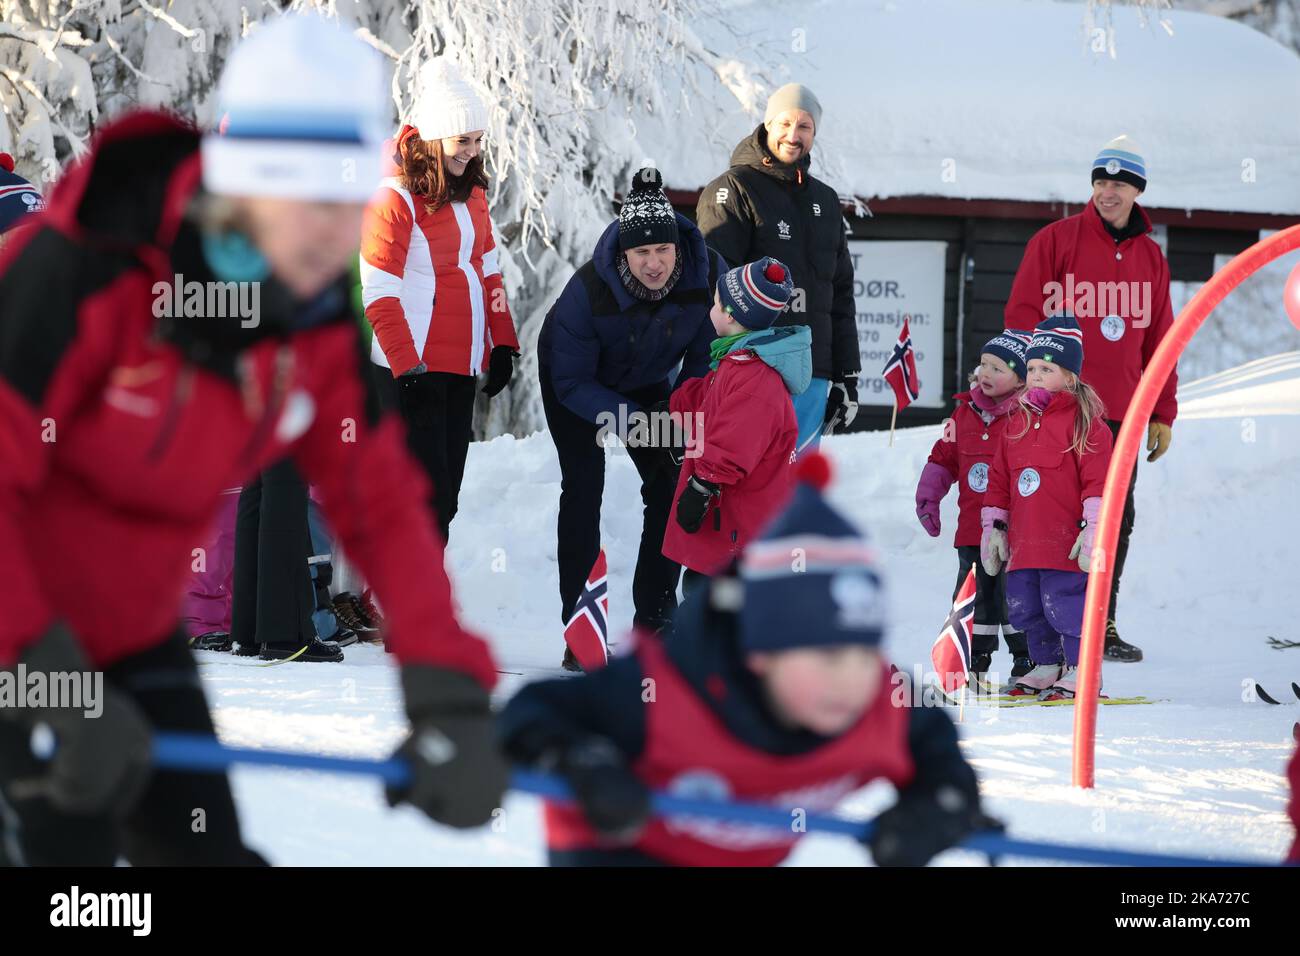 Oslo, Norway 20180202. Prince William of Great Britain and Duchess Kate visits Oevresetertjern at Tryvann in Oslo as the last point of the program on their official visit to Norway. Here they can see skiing activities at a ski school and visit the Tomm Mustad open-air nursery school. From left: Duchess Kate, Prince William and Crown Prince Haakon. Photo: Haakon Mosvold Larsen / NTB scanpi Stock Photo